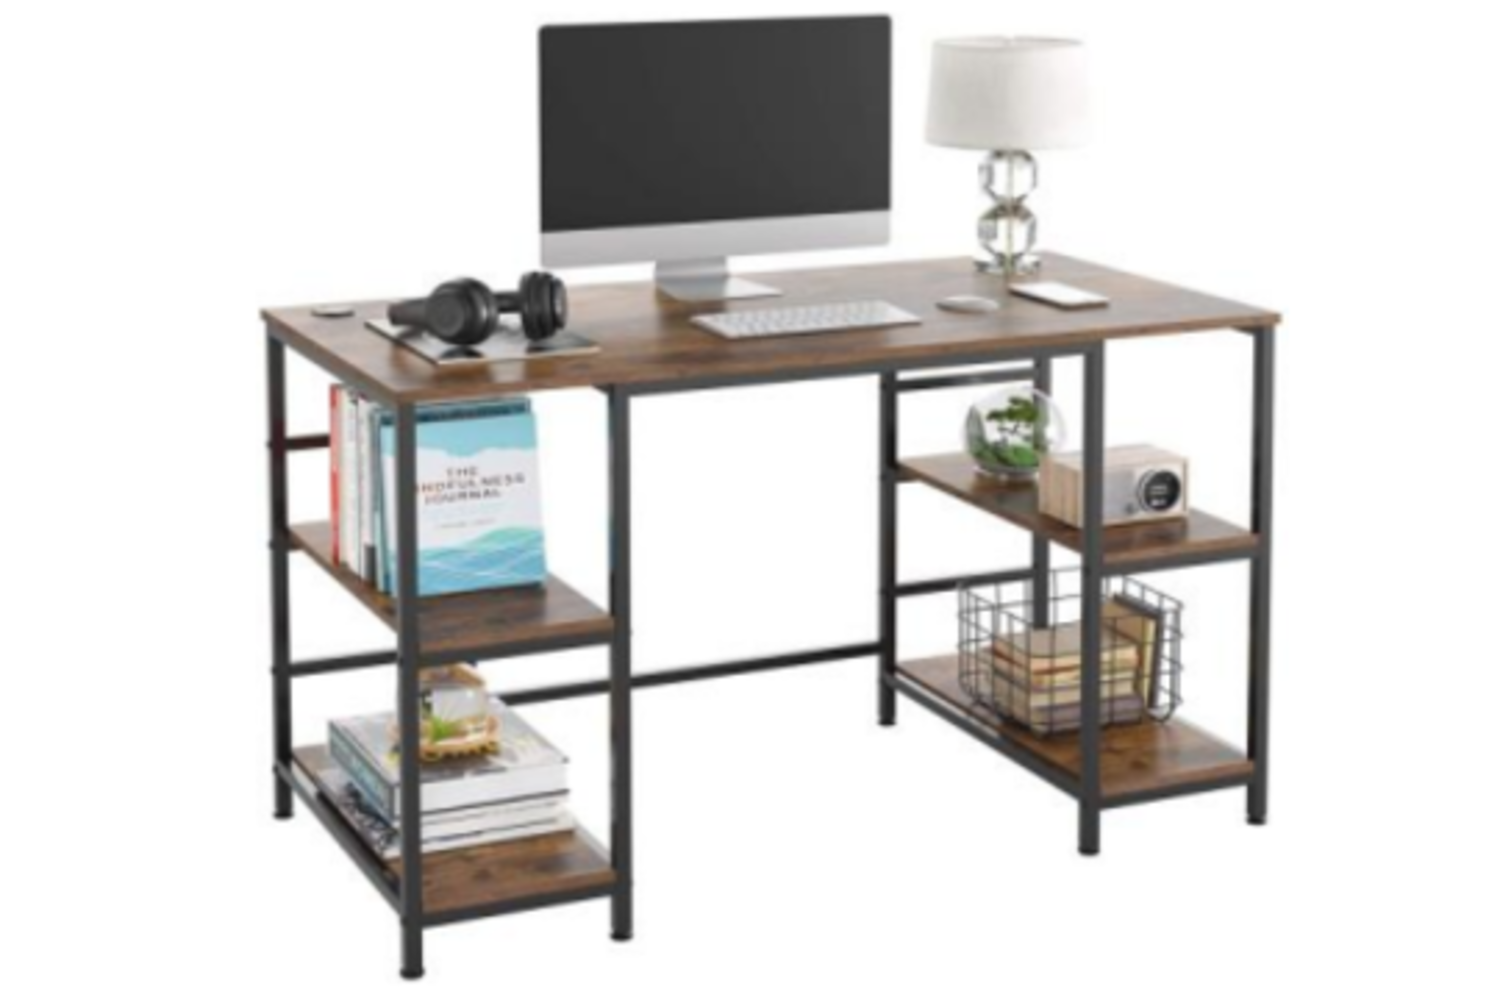 New Boxed Furniture to Include: Computer Desks, Book Shelfs, Laundry Baskets, Coffee Tables, TV Stands & More - Sold in Trade & Single Lots